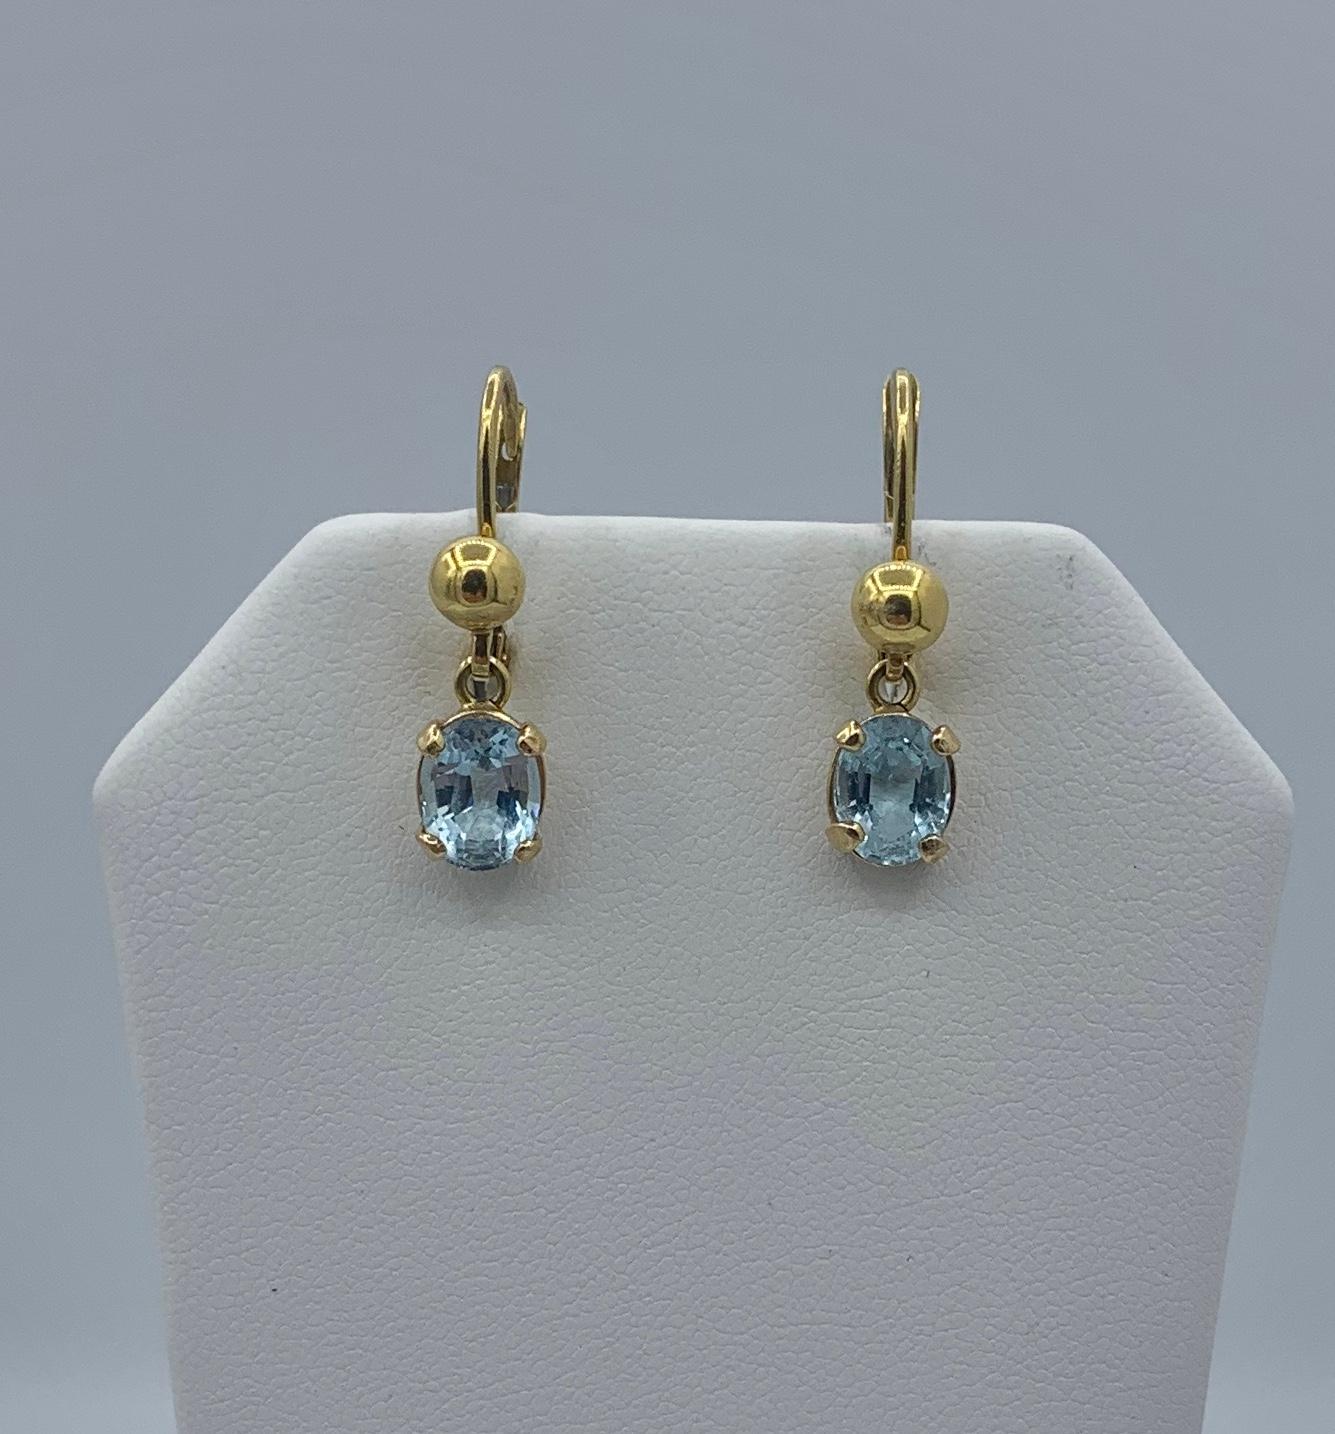 This is a gorgeous pair of Retro Blue Topaz Dangle Drop Earrings in 14 Karat Yellow Gold.  The blue topaz gems total approximately 3.5 Carats.  The gems are a gorgeous light sky blue color, they are very clean and very lively.  The oval faceted